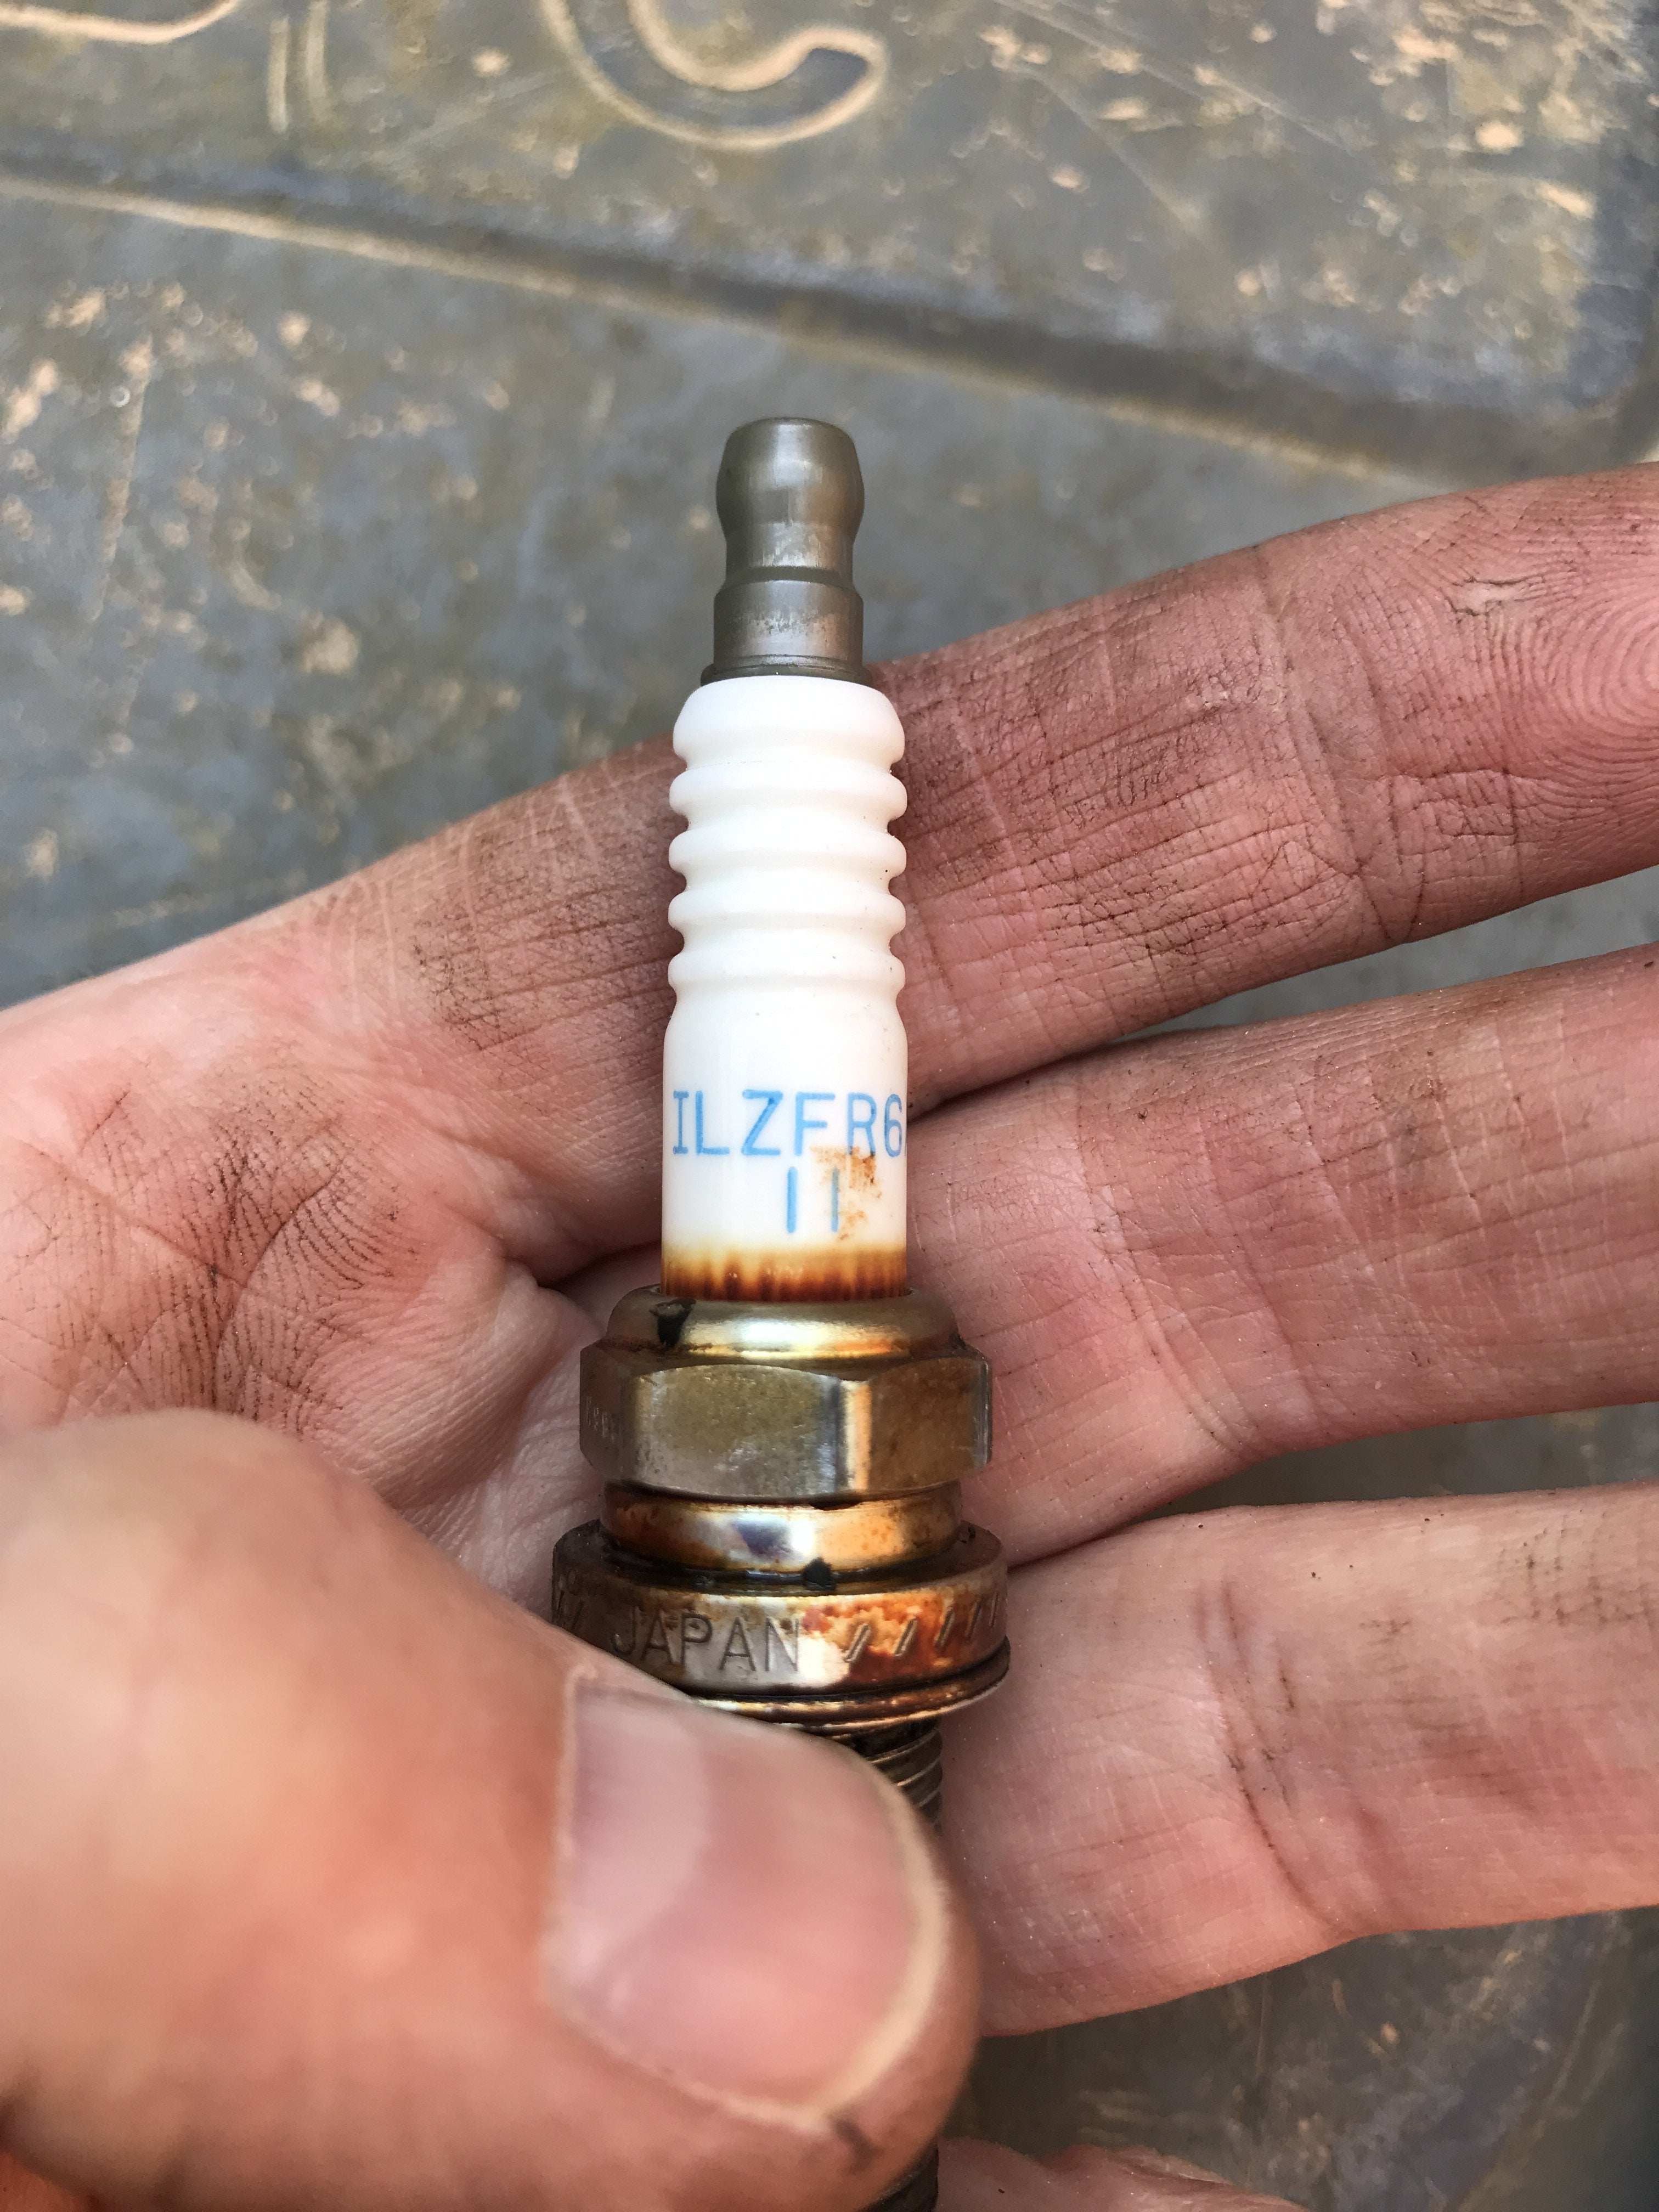 How to check spark plugs